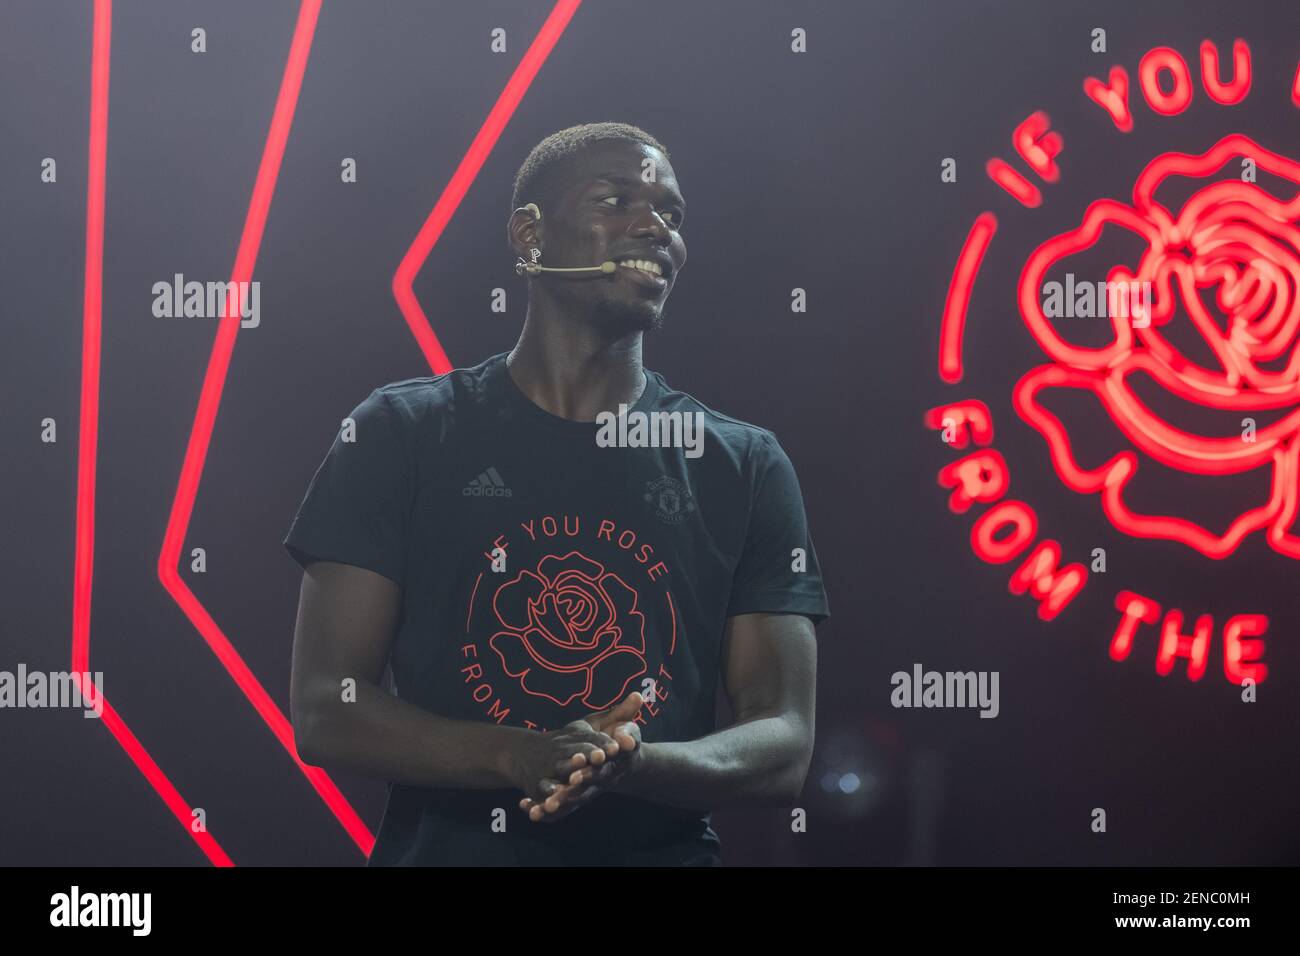 Paul Pogba of Manchester United F.C. of Premier League attends a promotional  event for adidas during 2019 pre-season tour in Shanghai, China, 23 July  2019. (Photo by Zhou junxiang - Imaginechina/Sipa USA